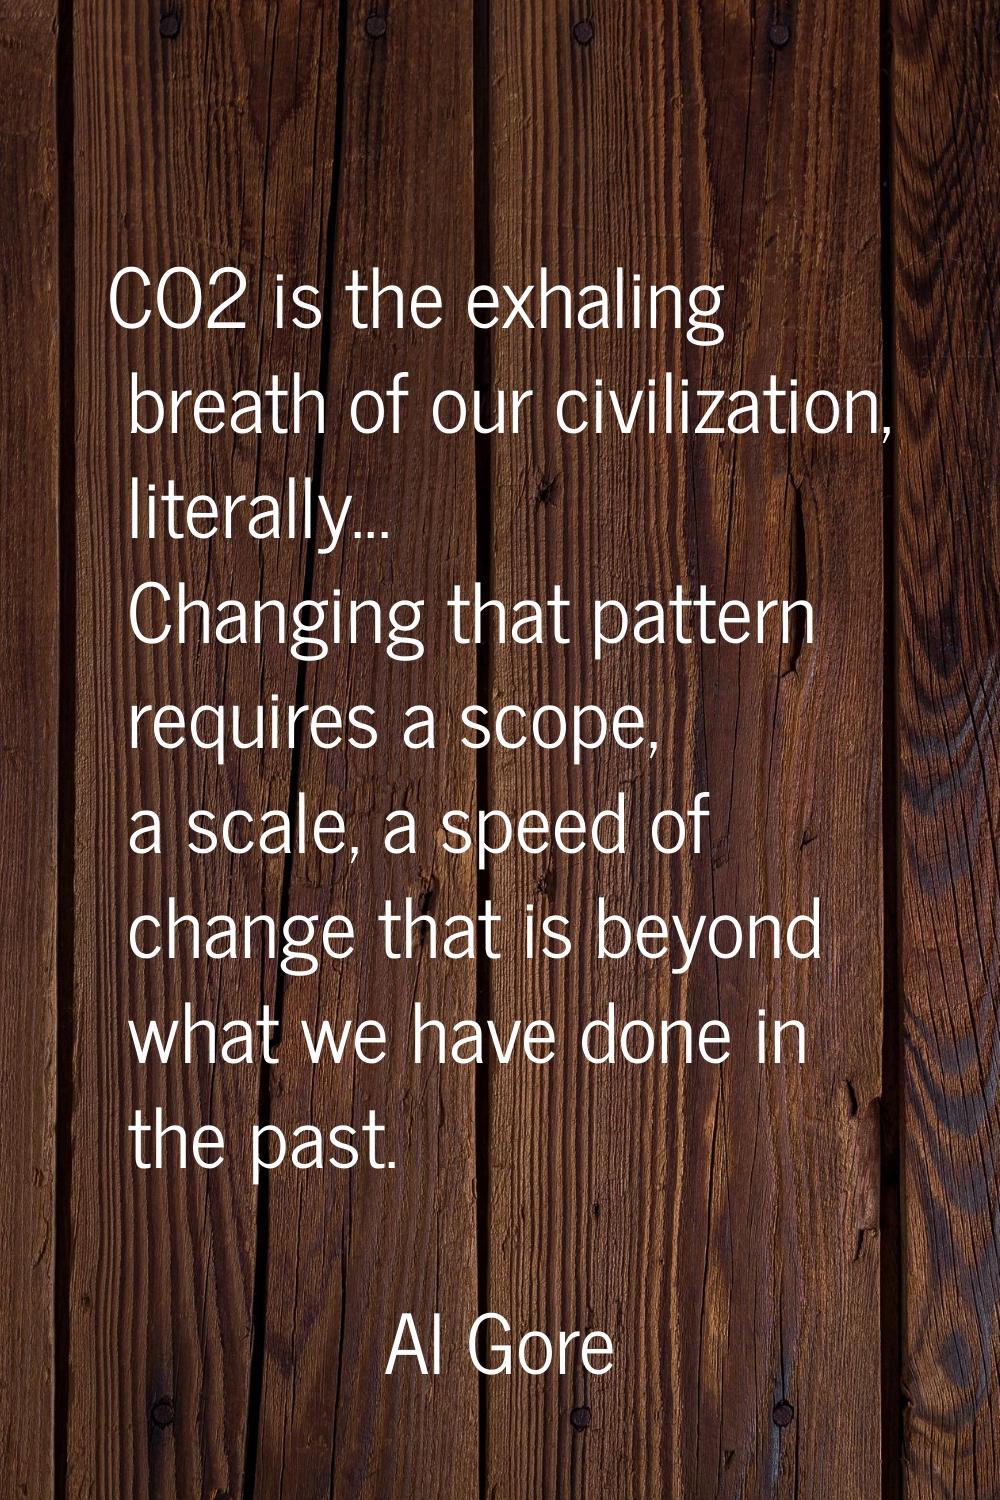 CO2 is the exhaling breath of our civilization, literally... Changing that pattern requires a scope